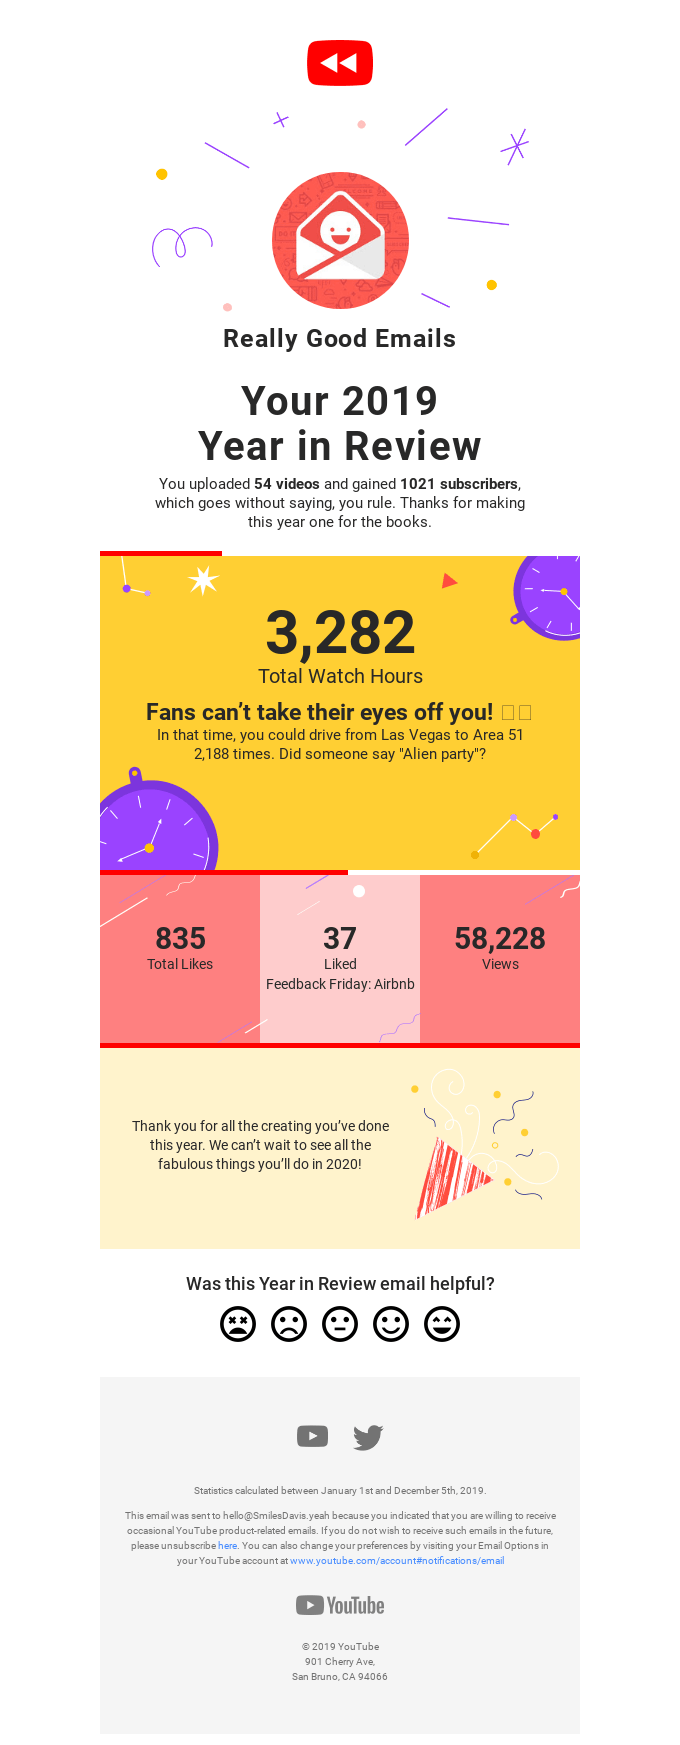 Really Good Emails, you’ve had an awesome year. See your 2019 Year in Review!